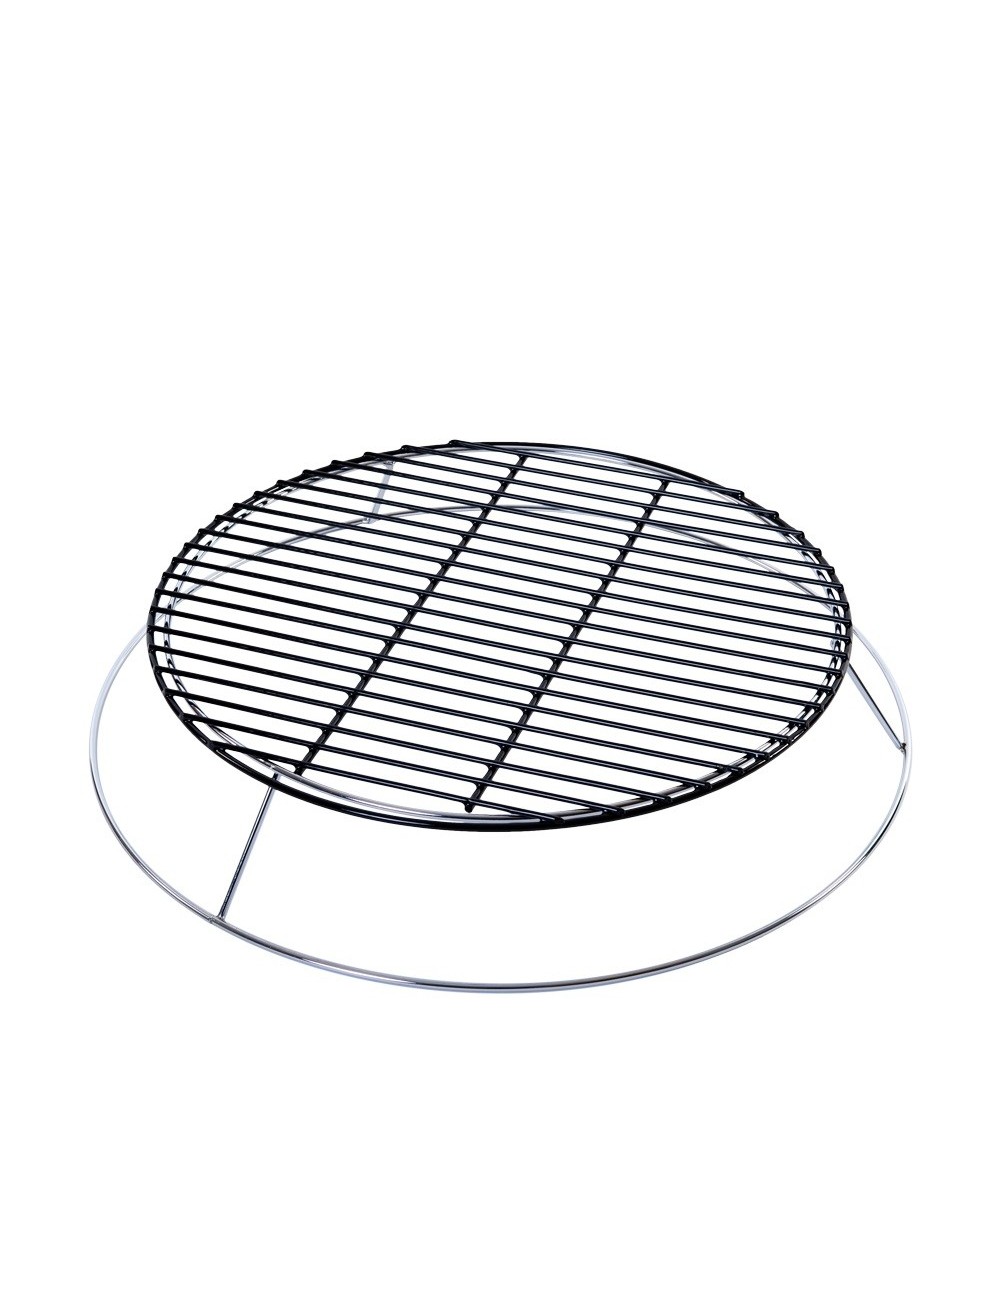 2 Level Cooking Grid - XLarge